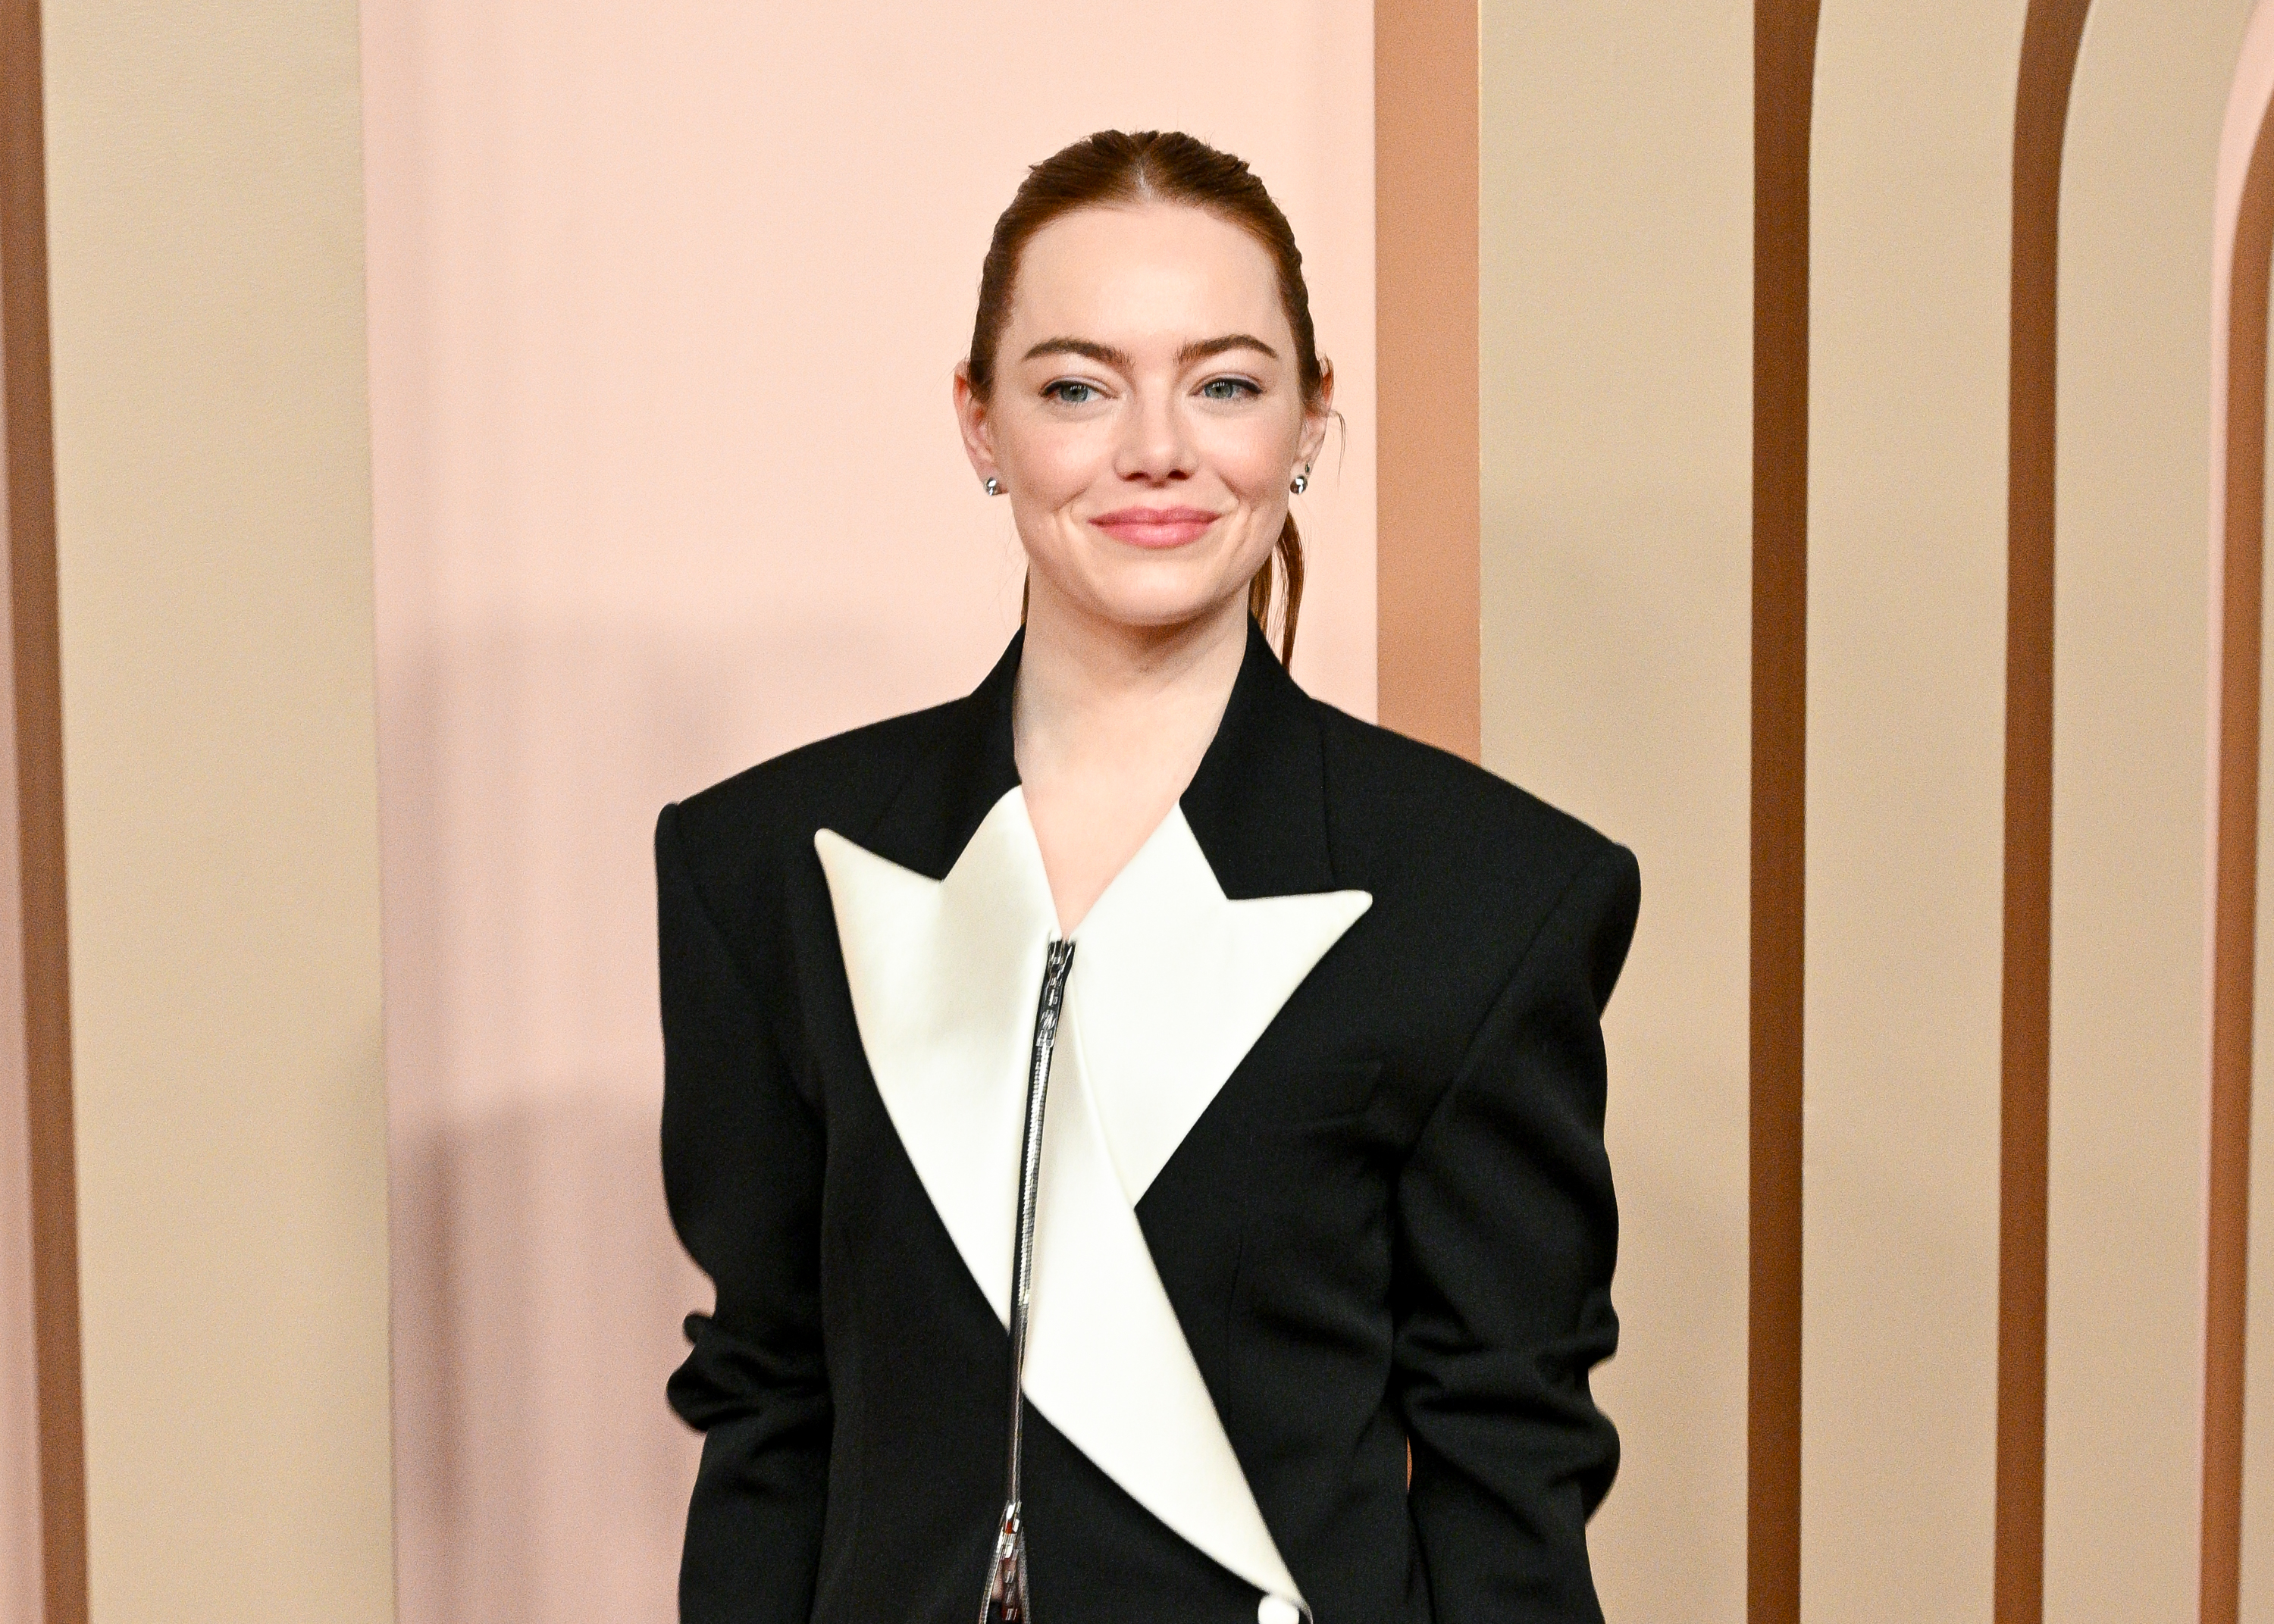 Emma Stone in a black jacket with an oversized white lapel, smiling at the camera